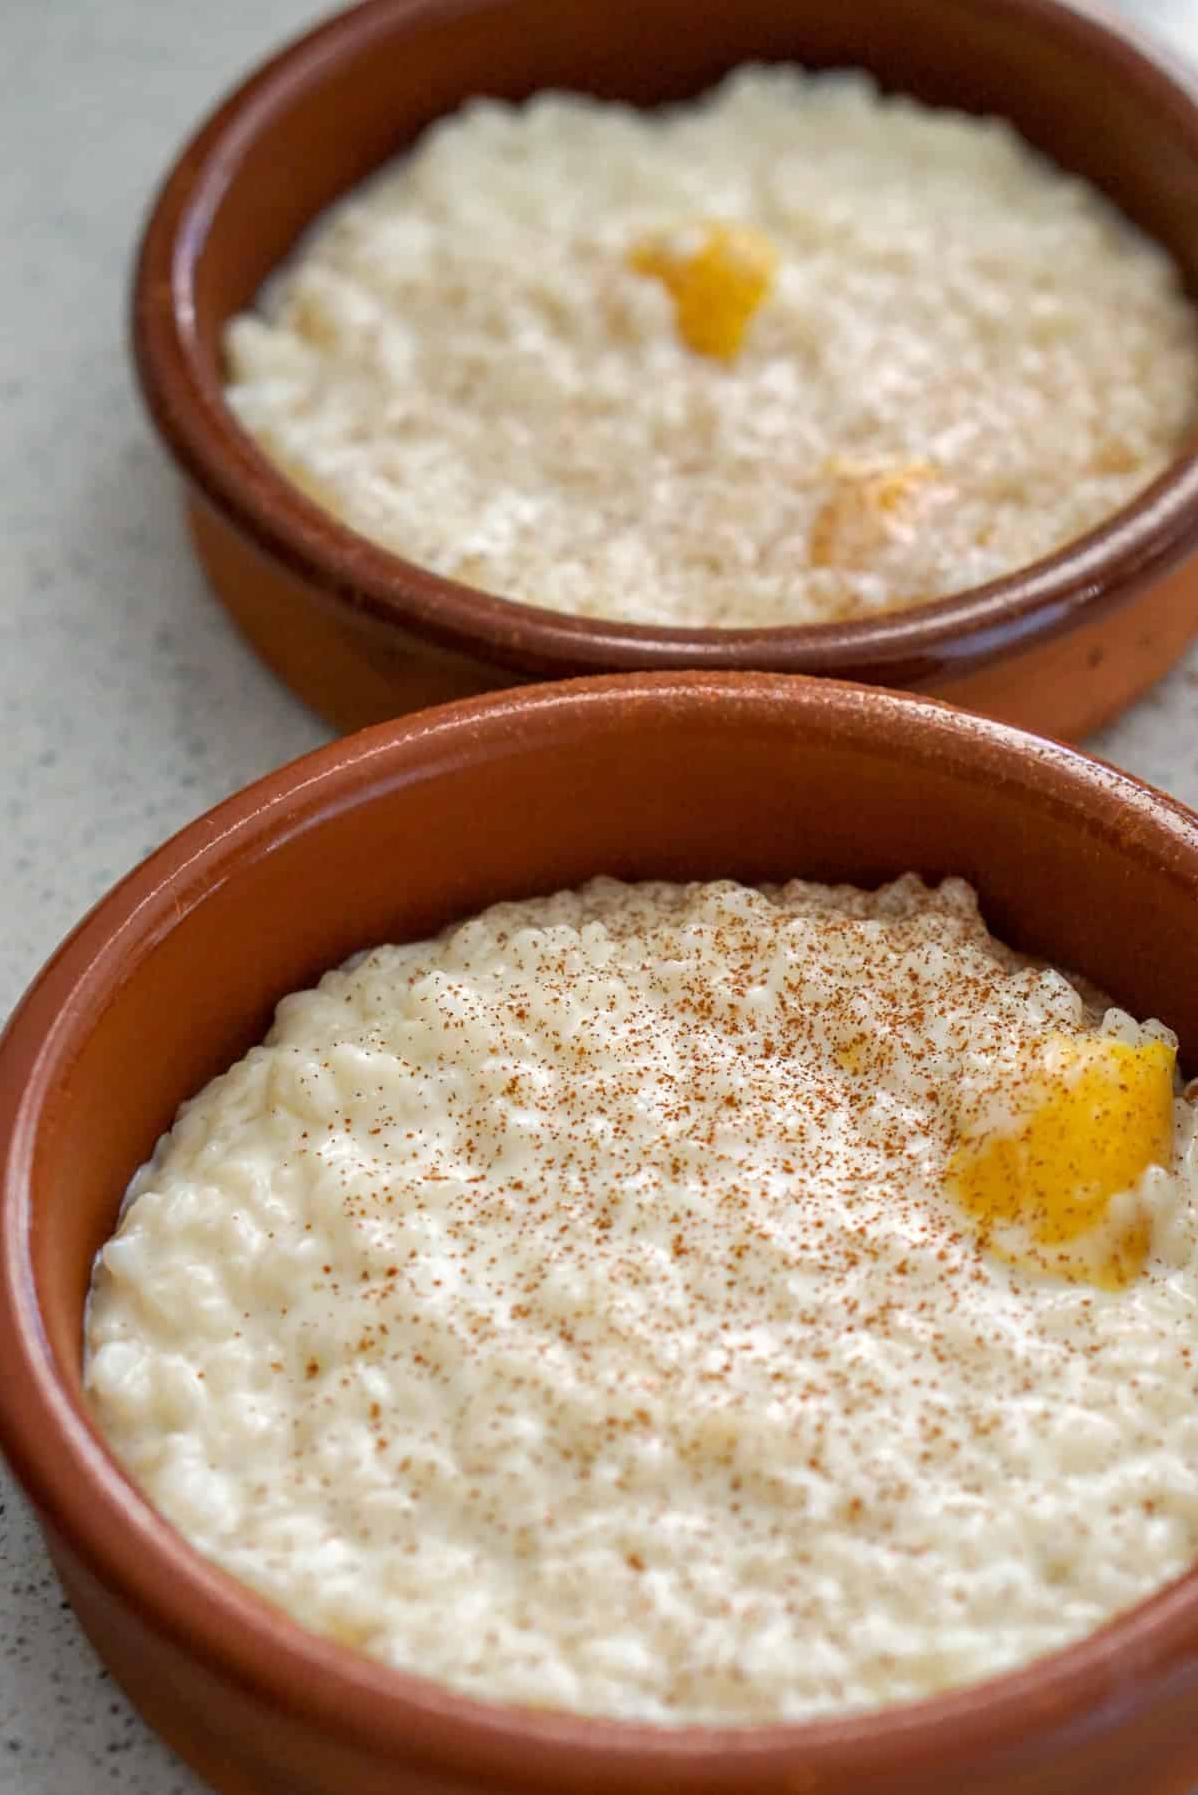  The creamy texture of the rice pudding will melt in your mouth, leaving a sweet and comforting taste behind.